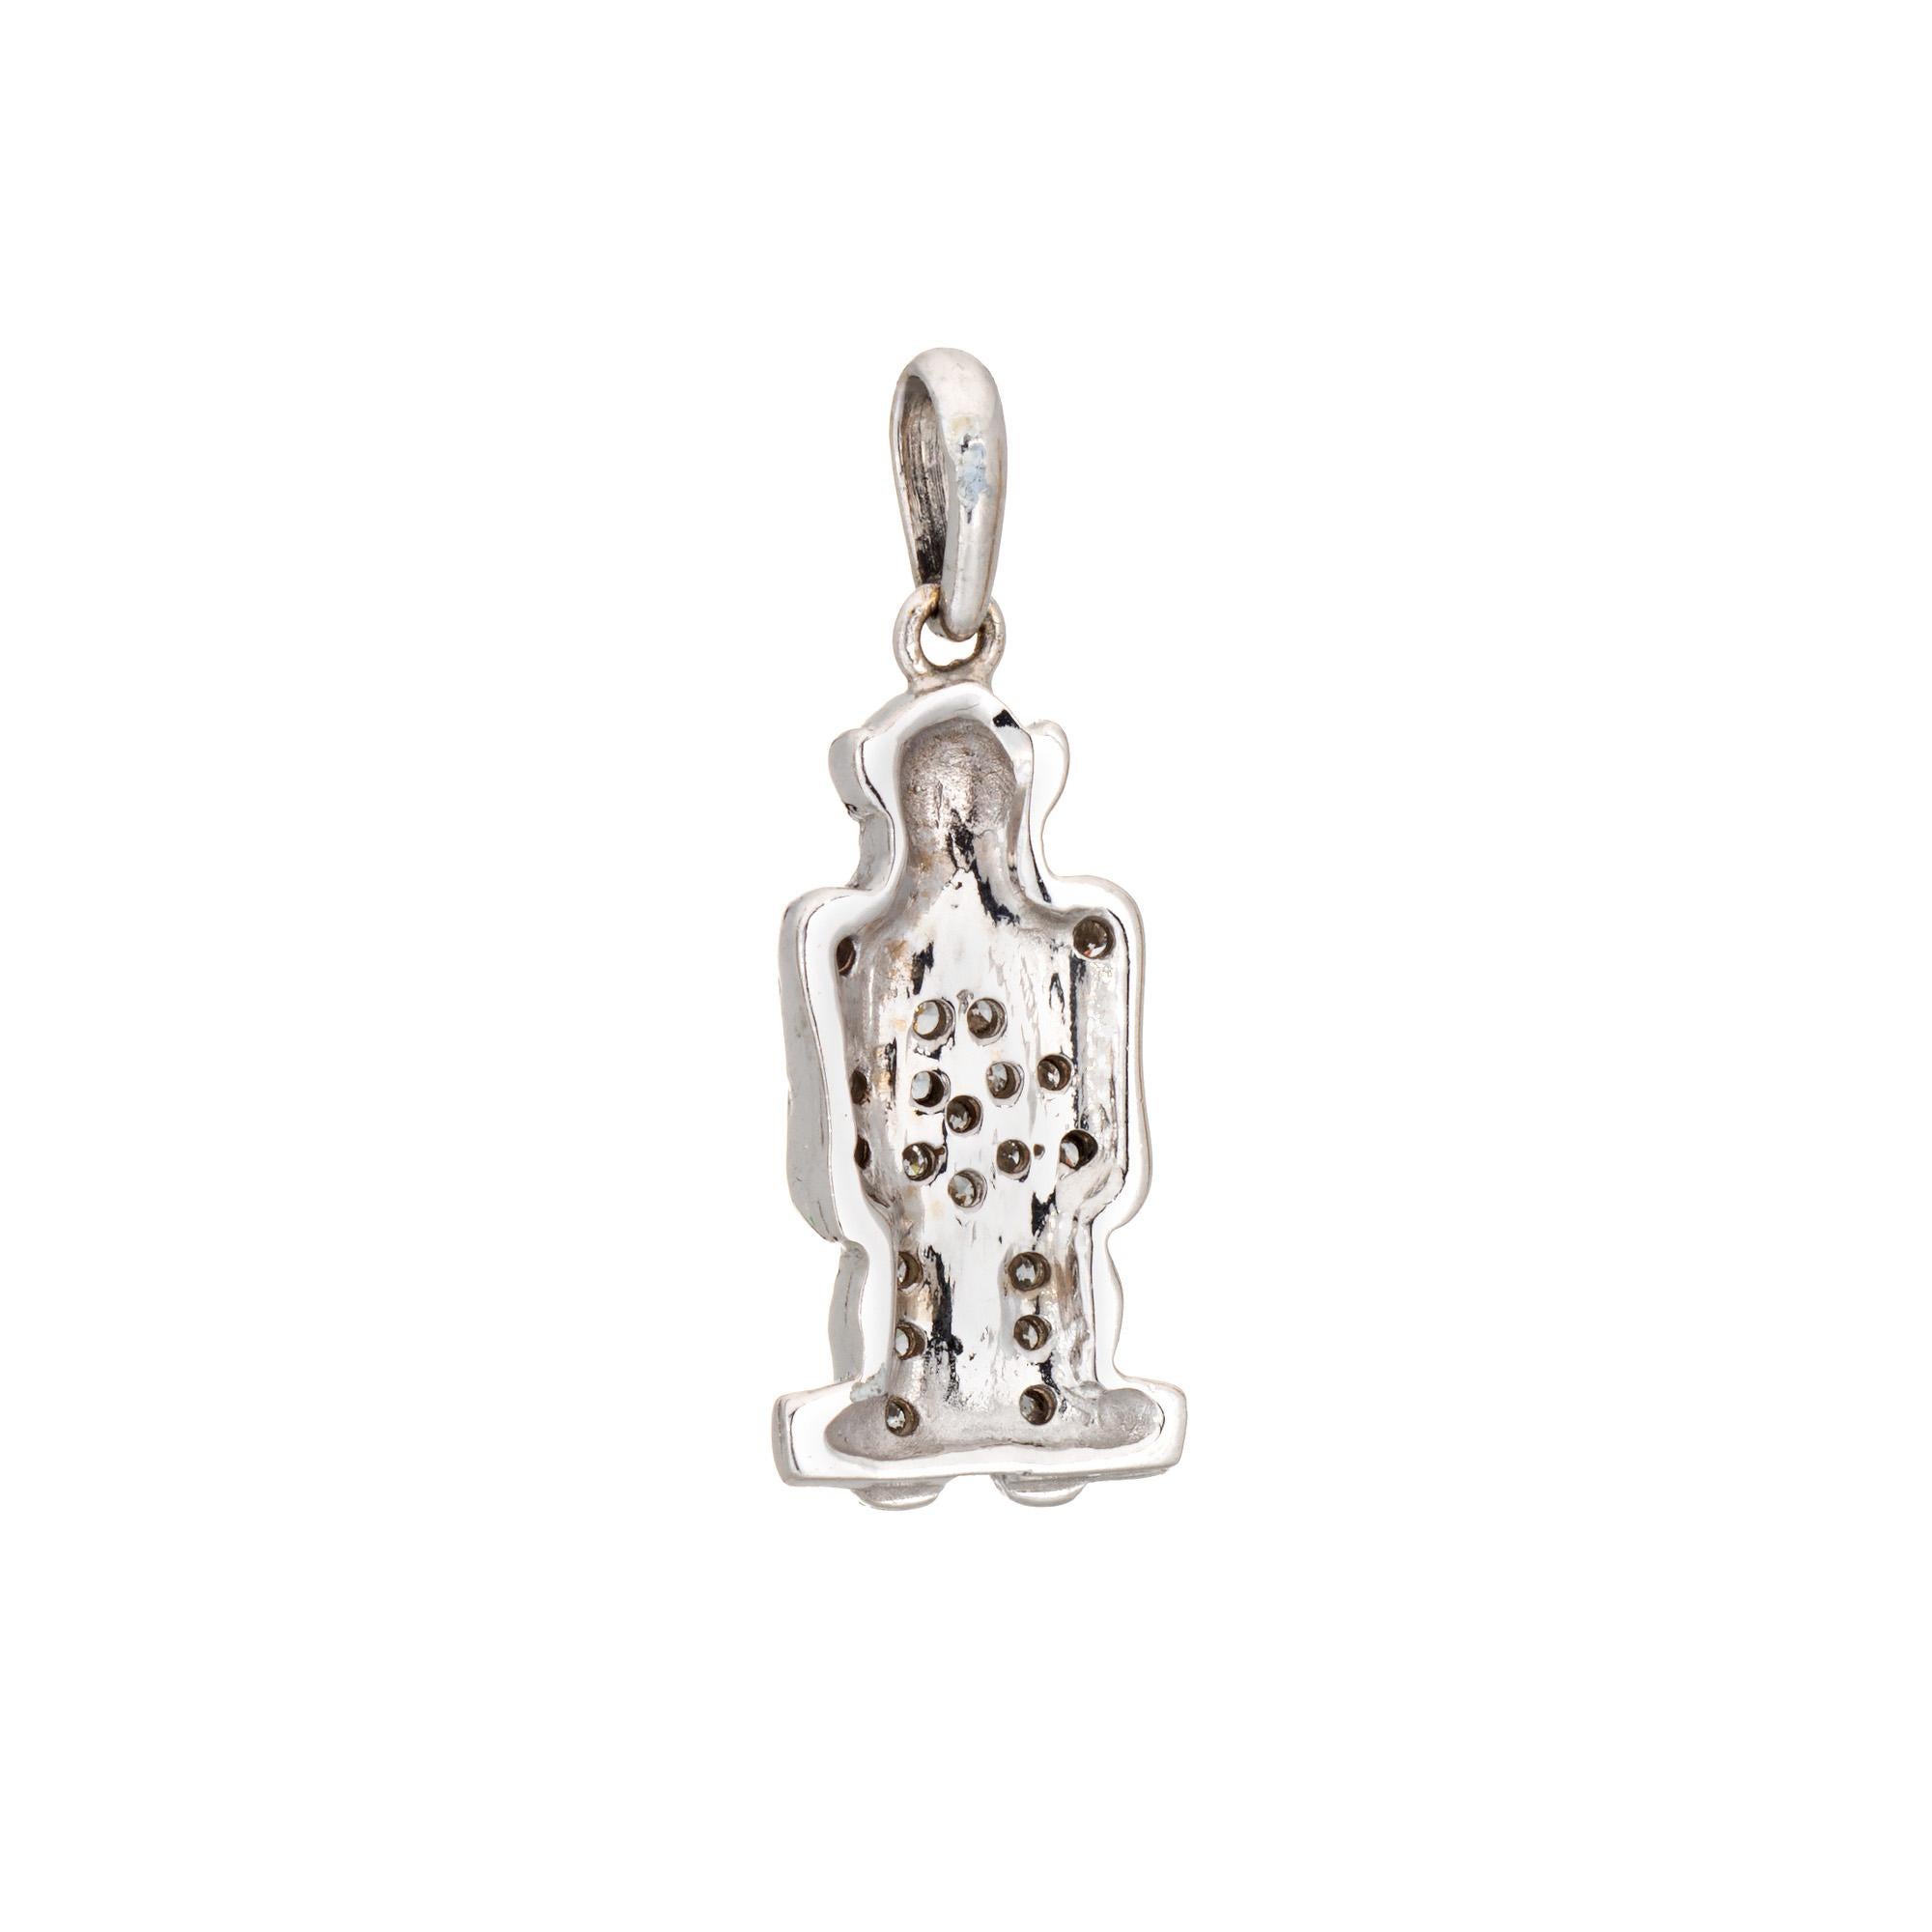 Finely detailed vintage 'See No Evil' Monkey charm crafted in 18k white gold. 20 round brilliant cut diamonds total an estimated 0.10 carats (estimated at H-I color and VS2-SI1 clarity).

The sweet and petite charm depicts a Monkey covering its